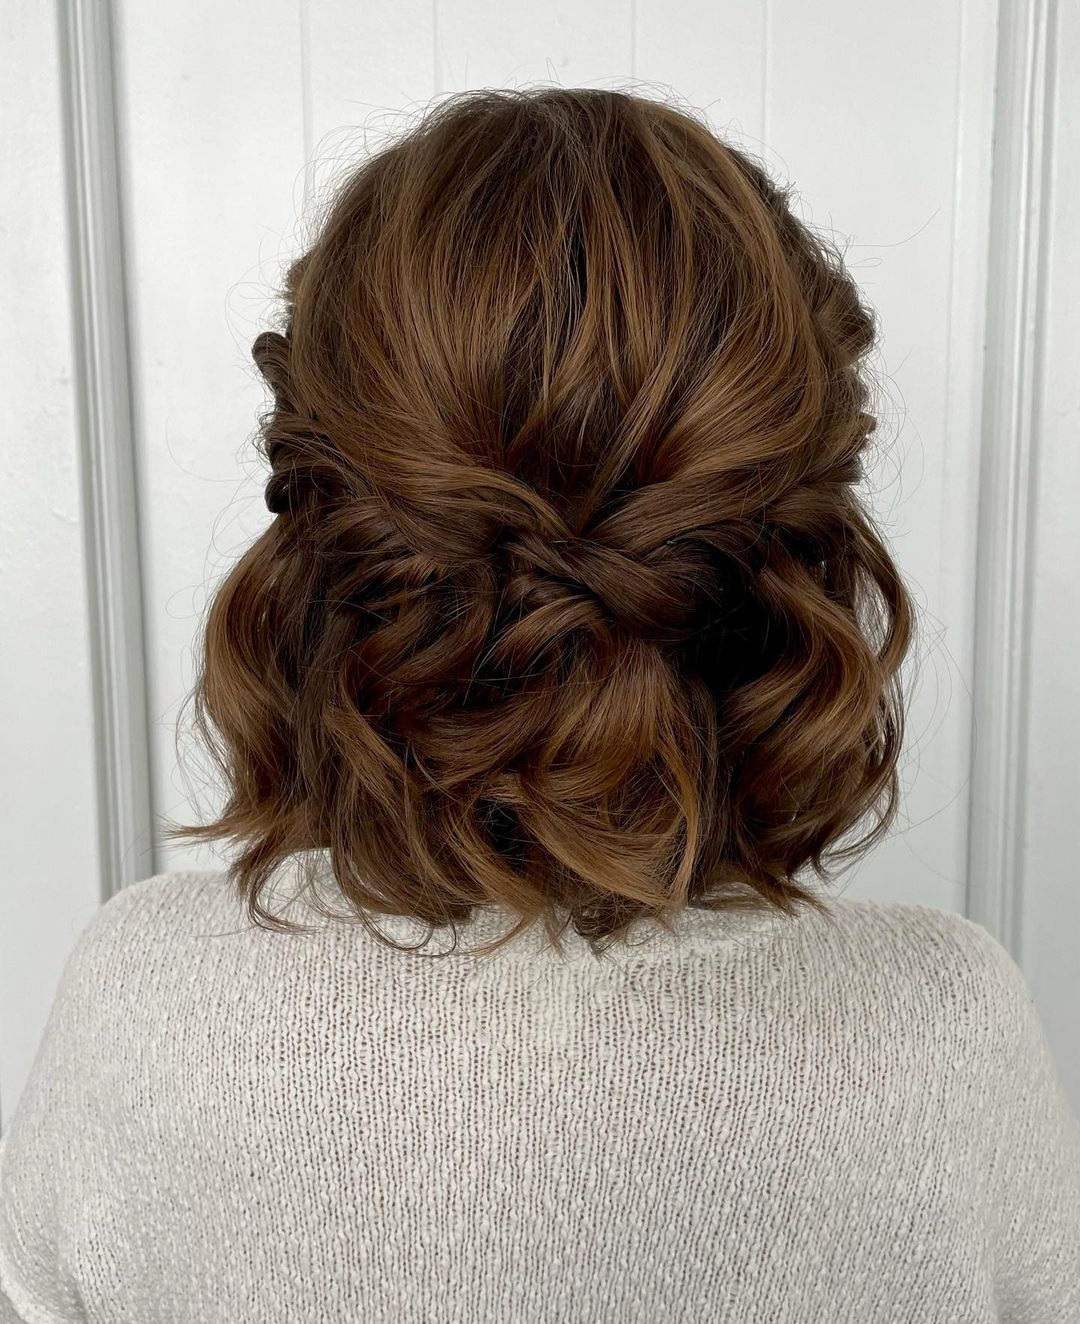 Here Are 5 Chic Hairstyles to Try With Floor Length Dress • Keep Me Stylish